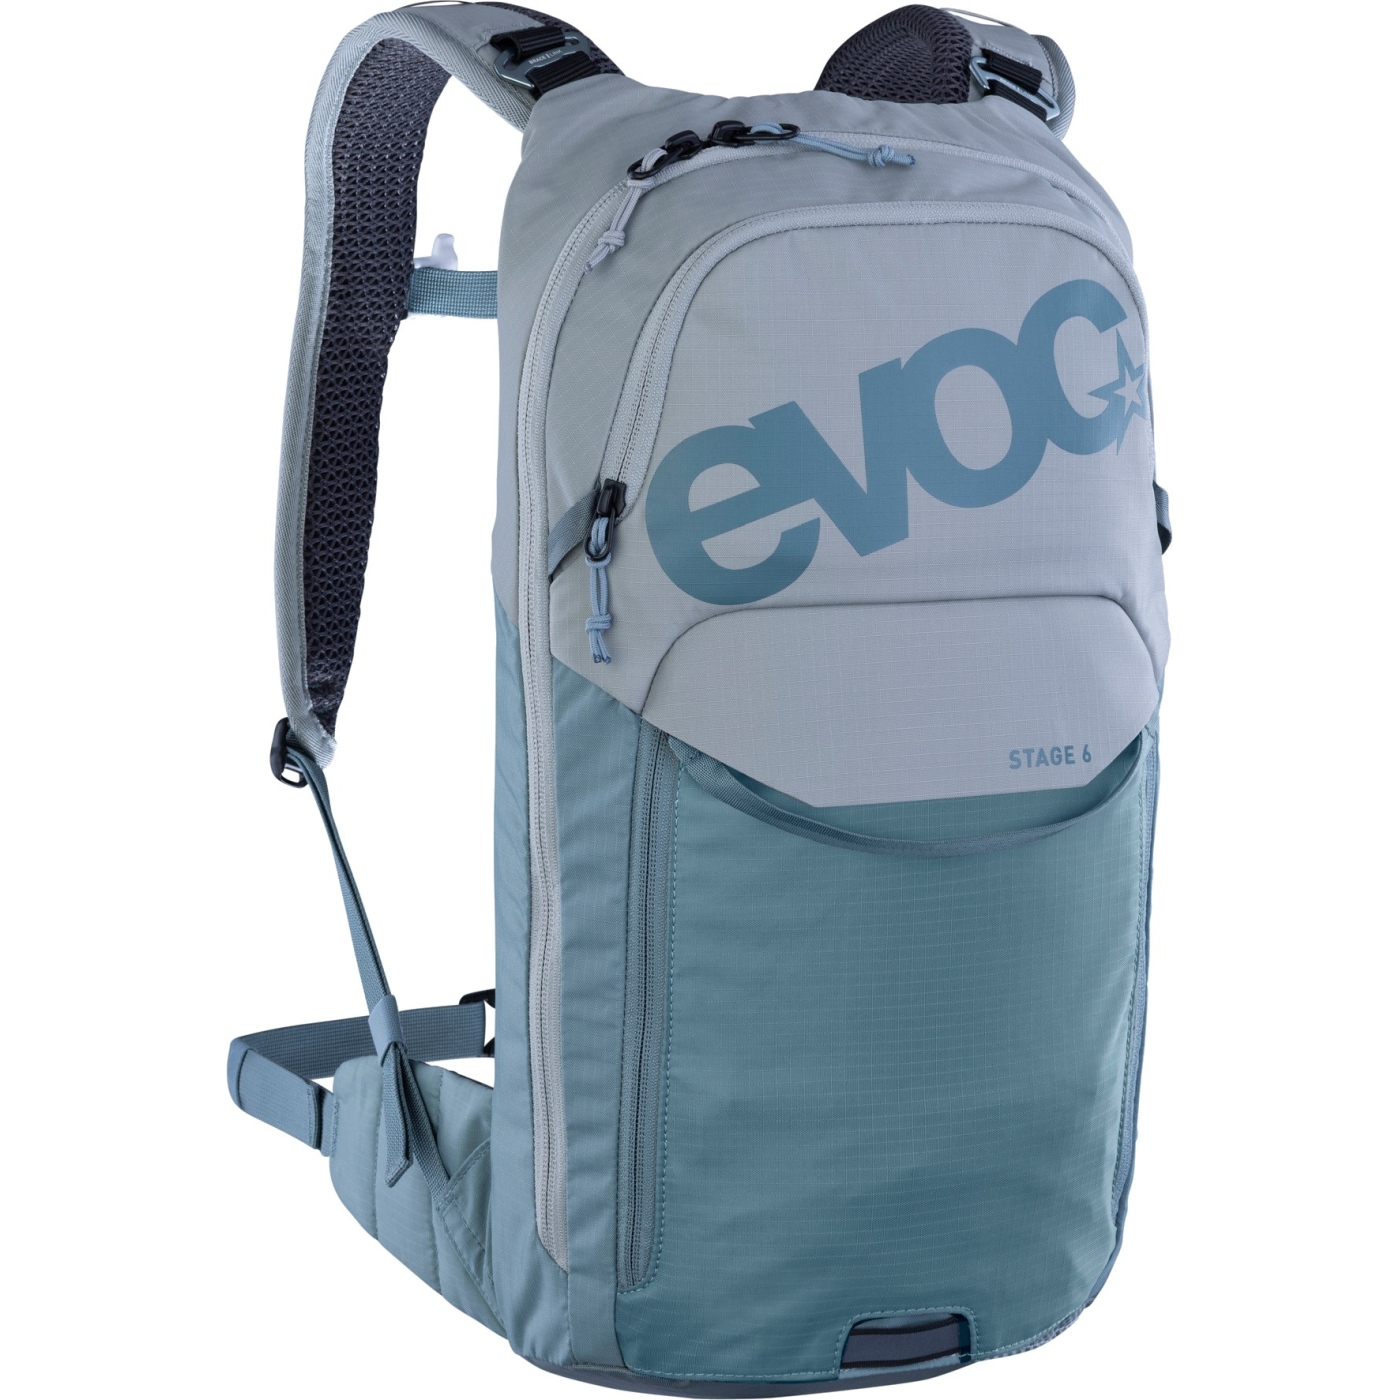 Picture of EVOC Stage Backpack - 6 L - Stone - Steel